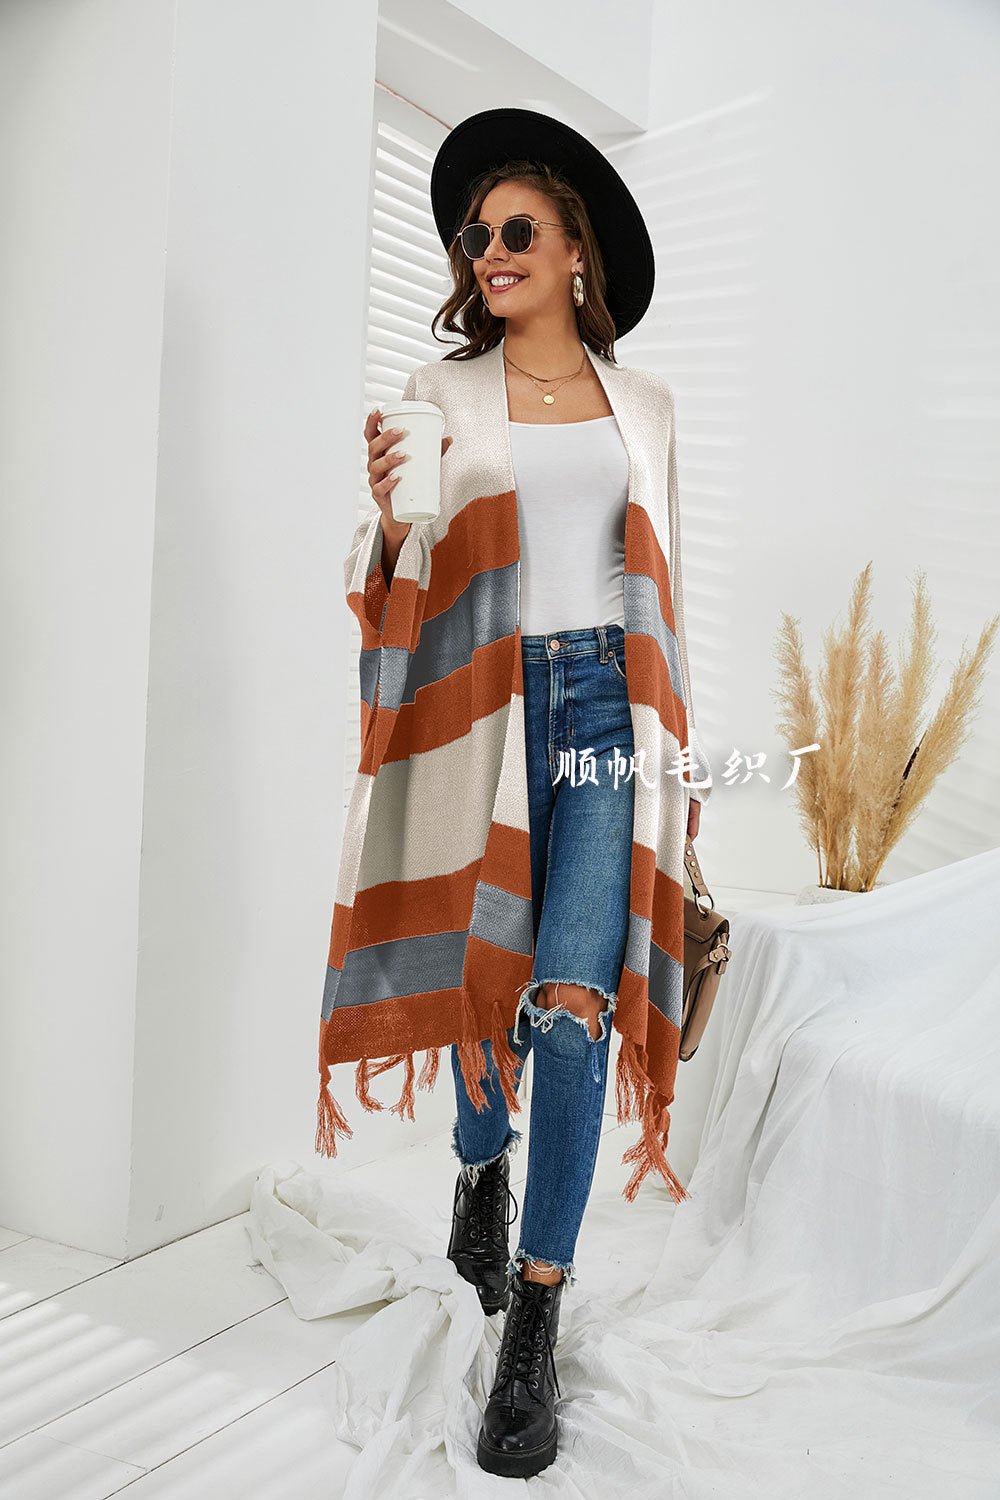 Women Plus Sizes Tassels Knitted Capes-Shirts & Tops-Free Shipping at meselling99